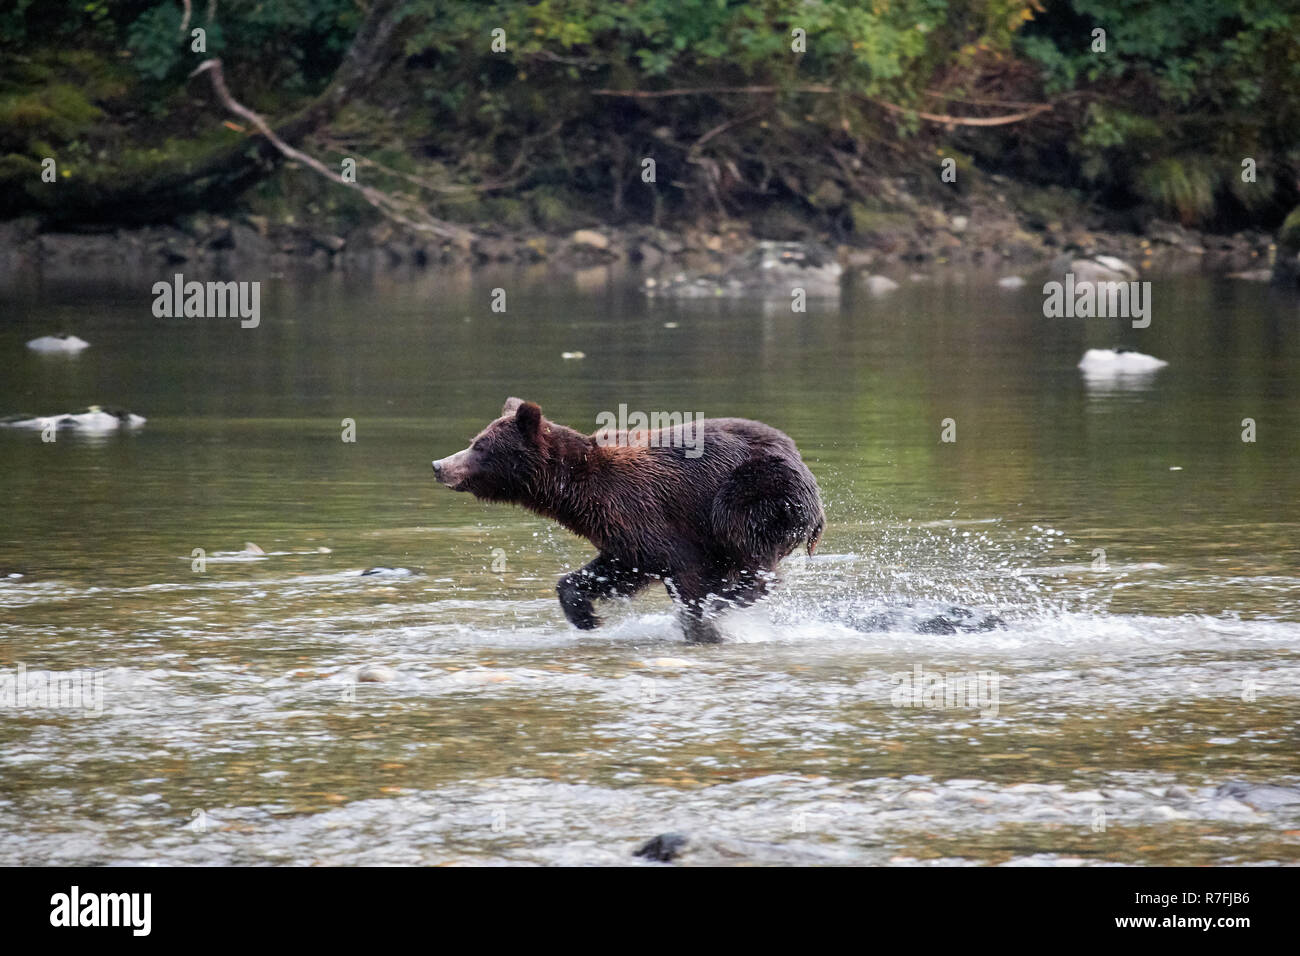 Grizzly bear trying to catch salmon, Great Bear Rainforest, Canada Stock Photo